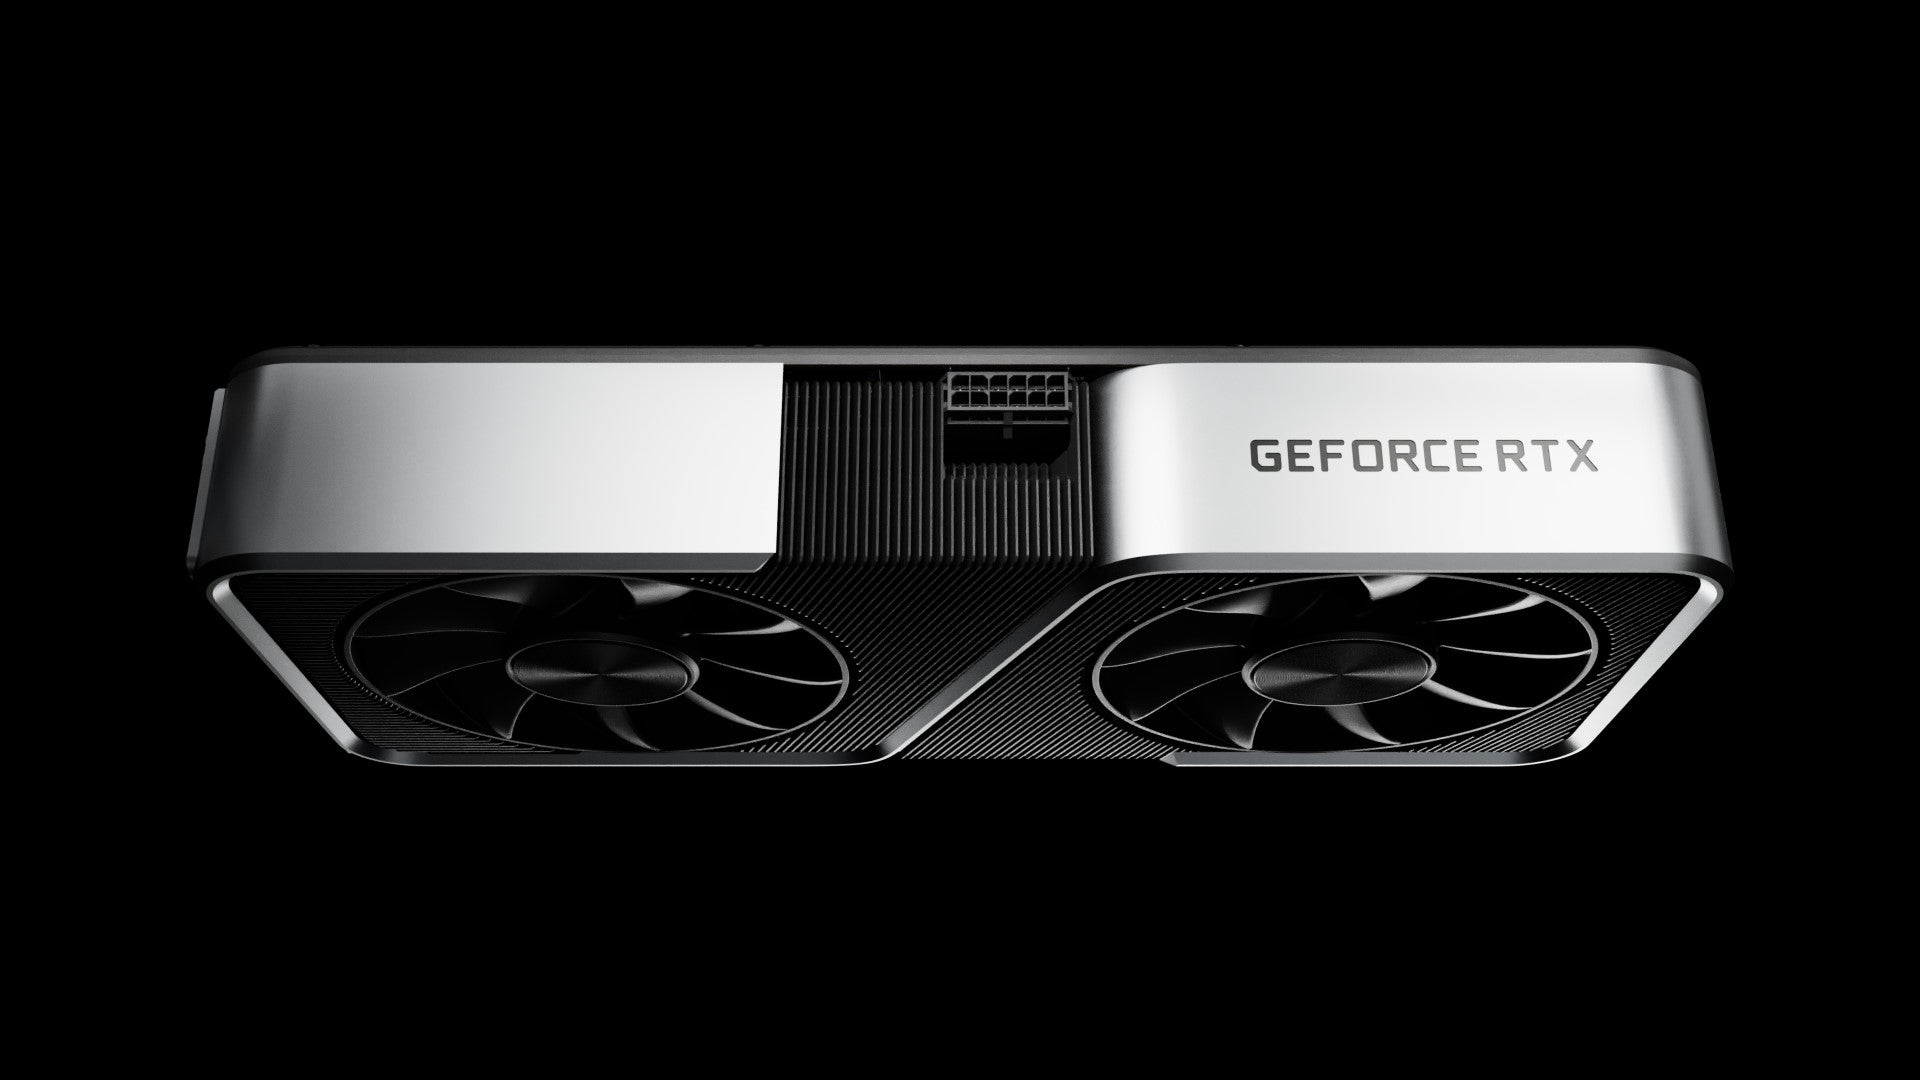 A side-on view of Nvidia's RTX 3060 Ti Founders Edition graphics card